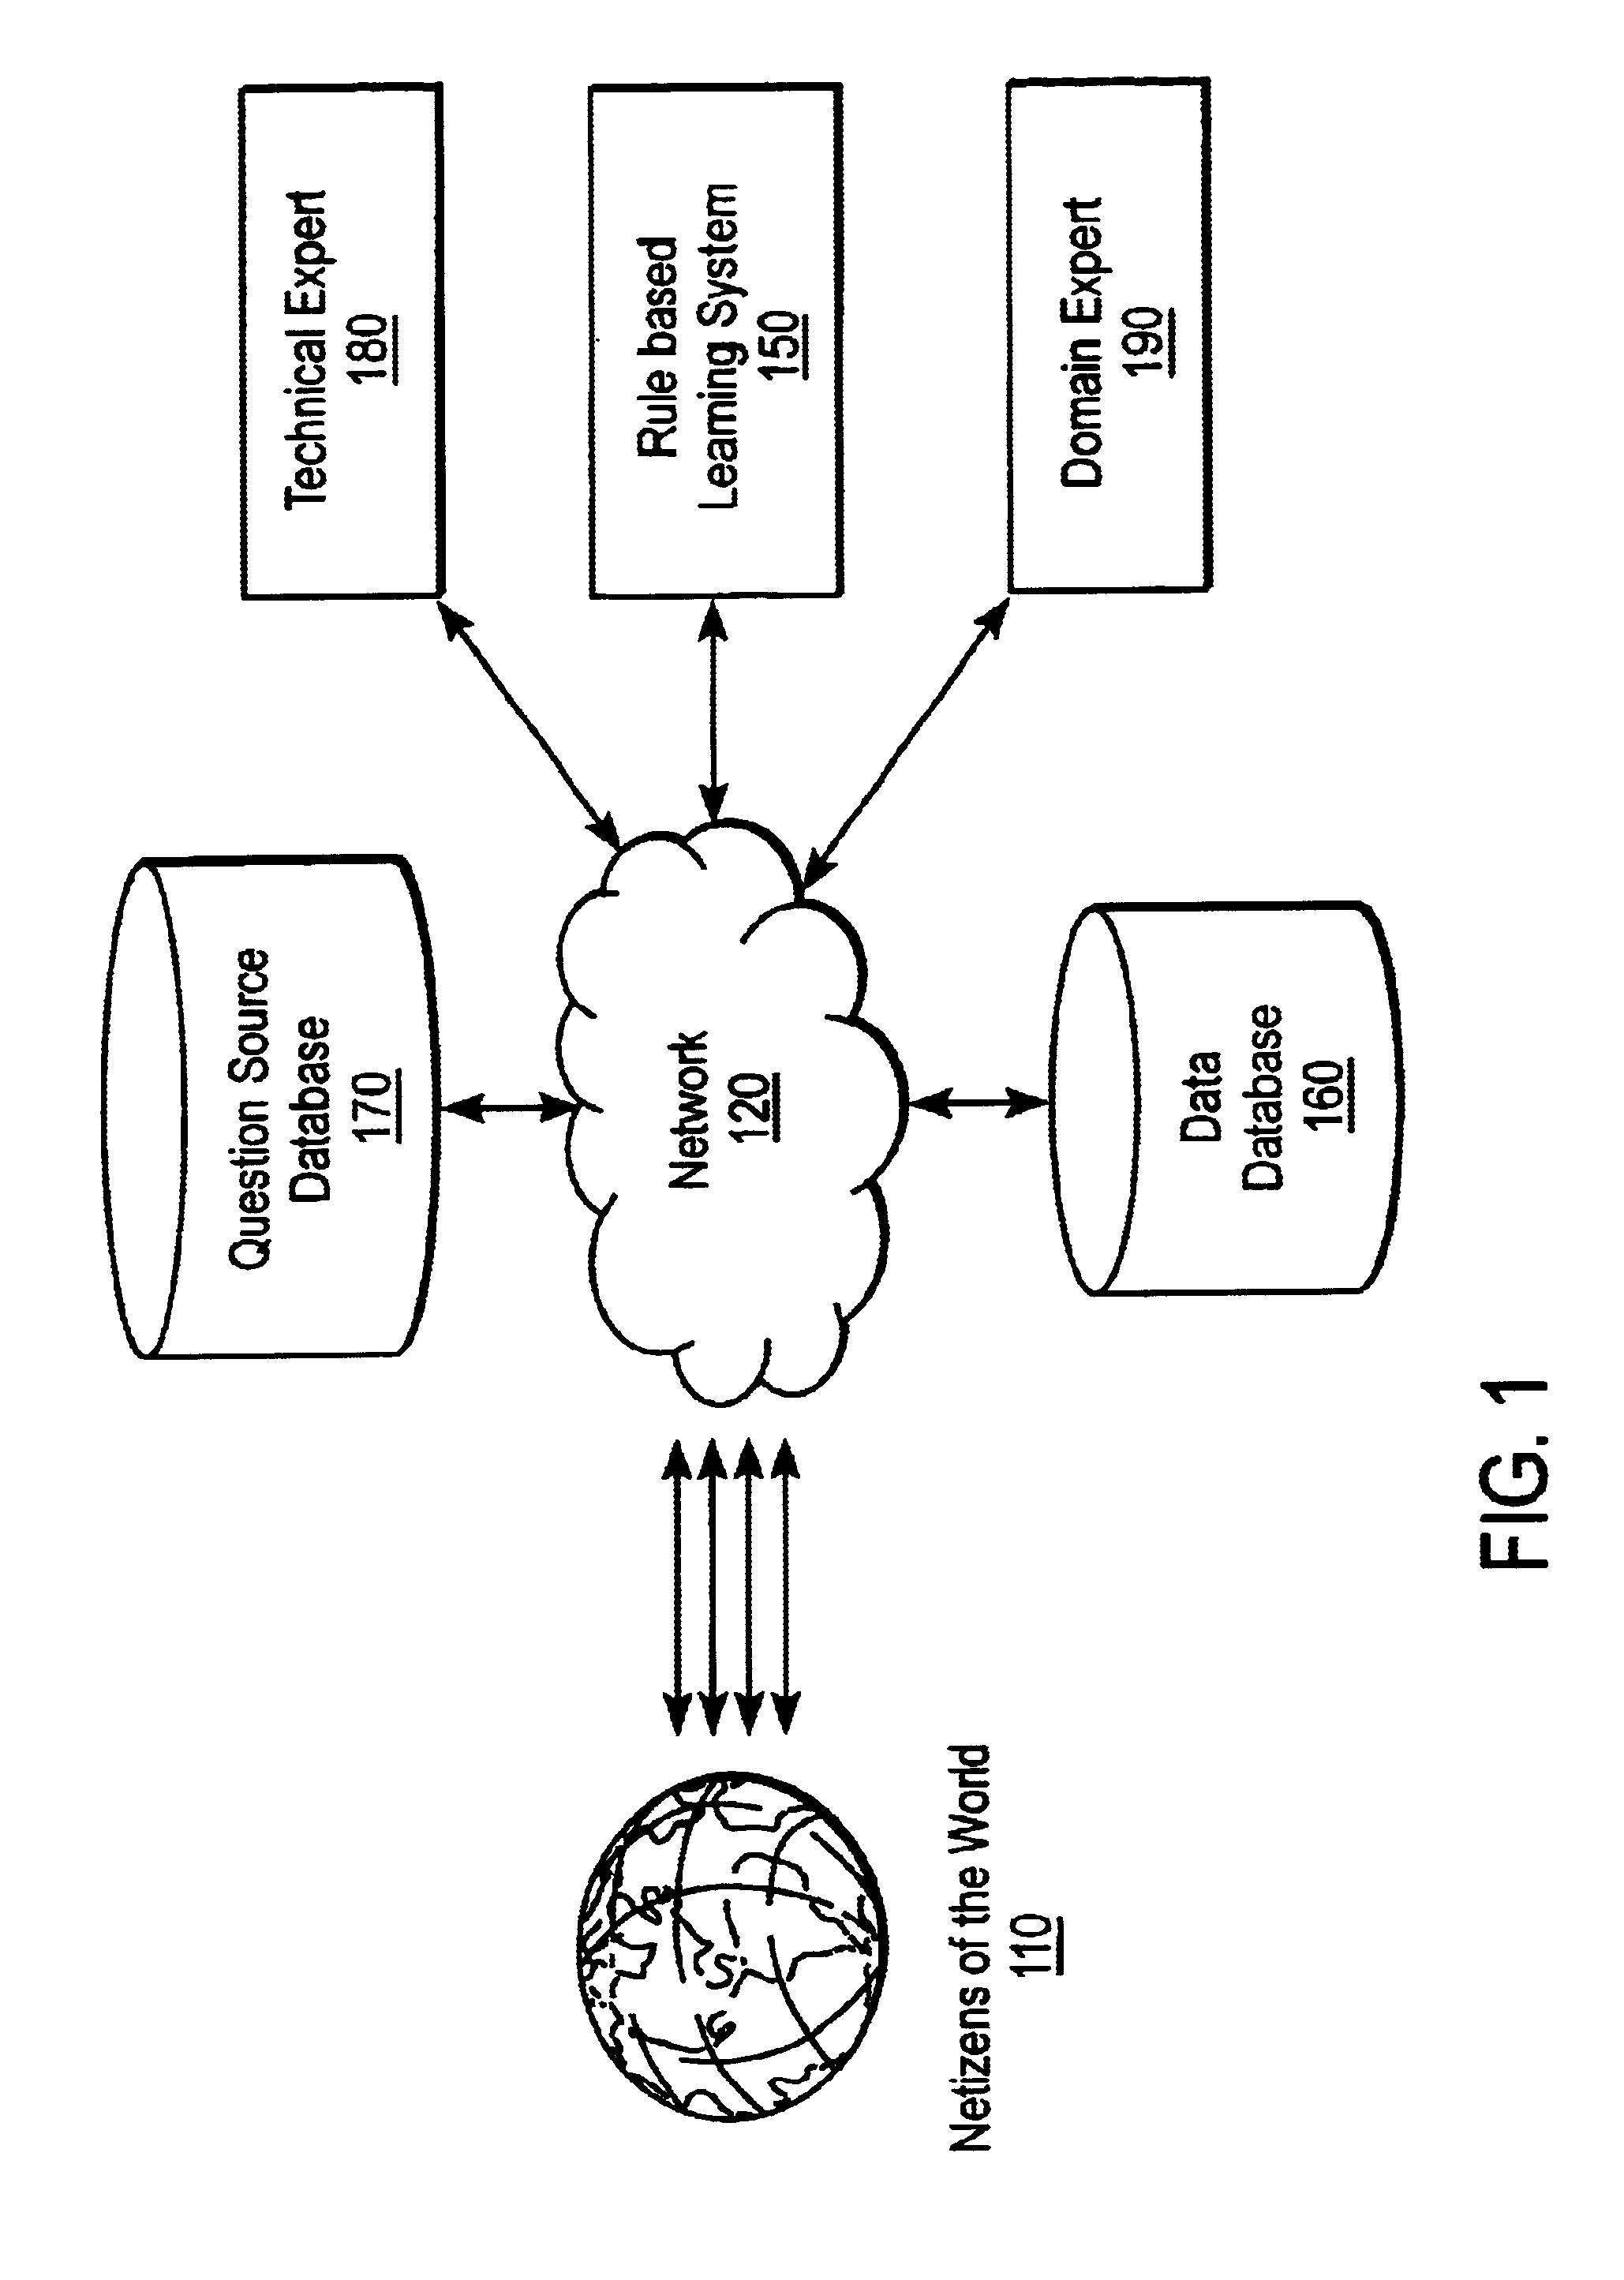 Method and apparatus for open data collection